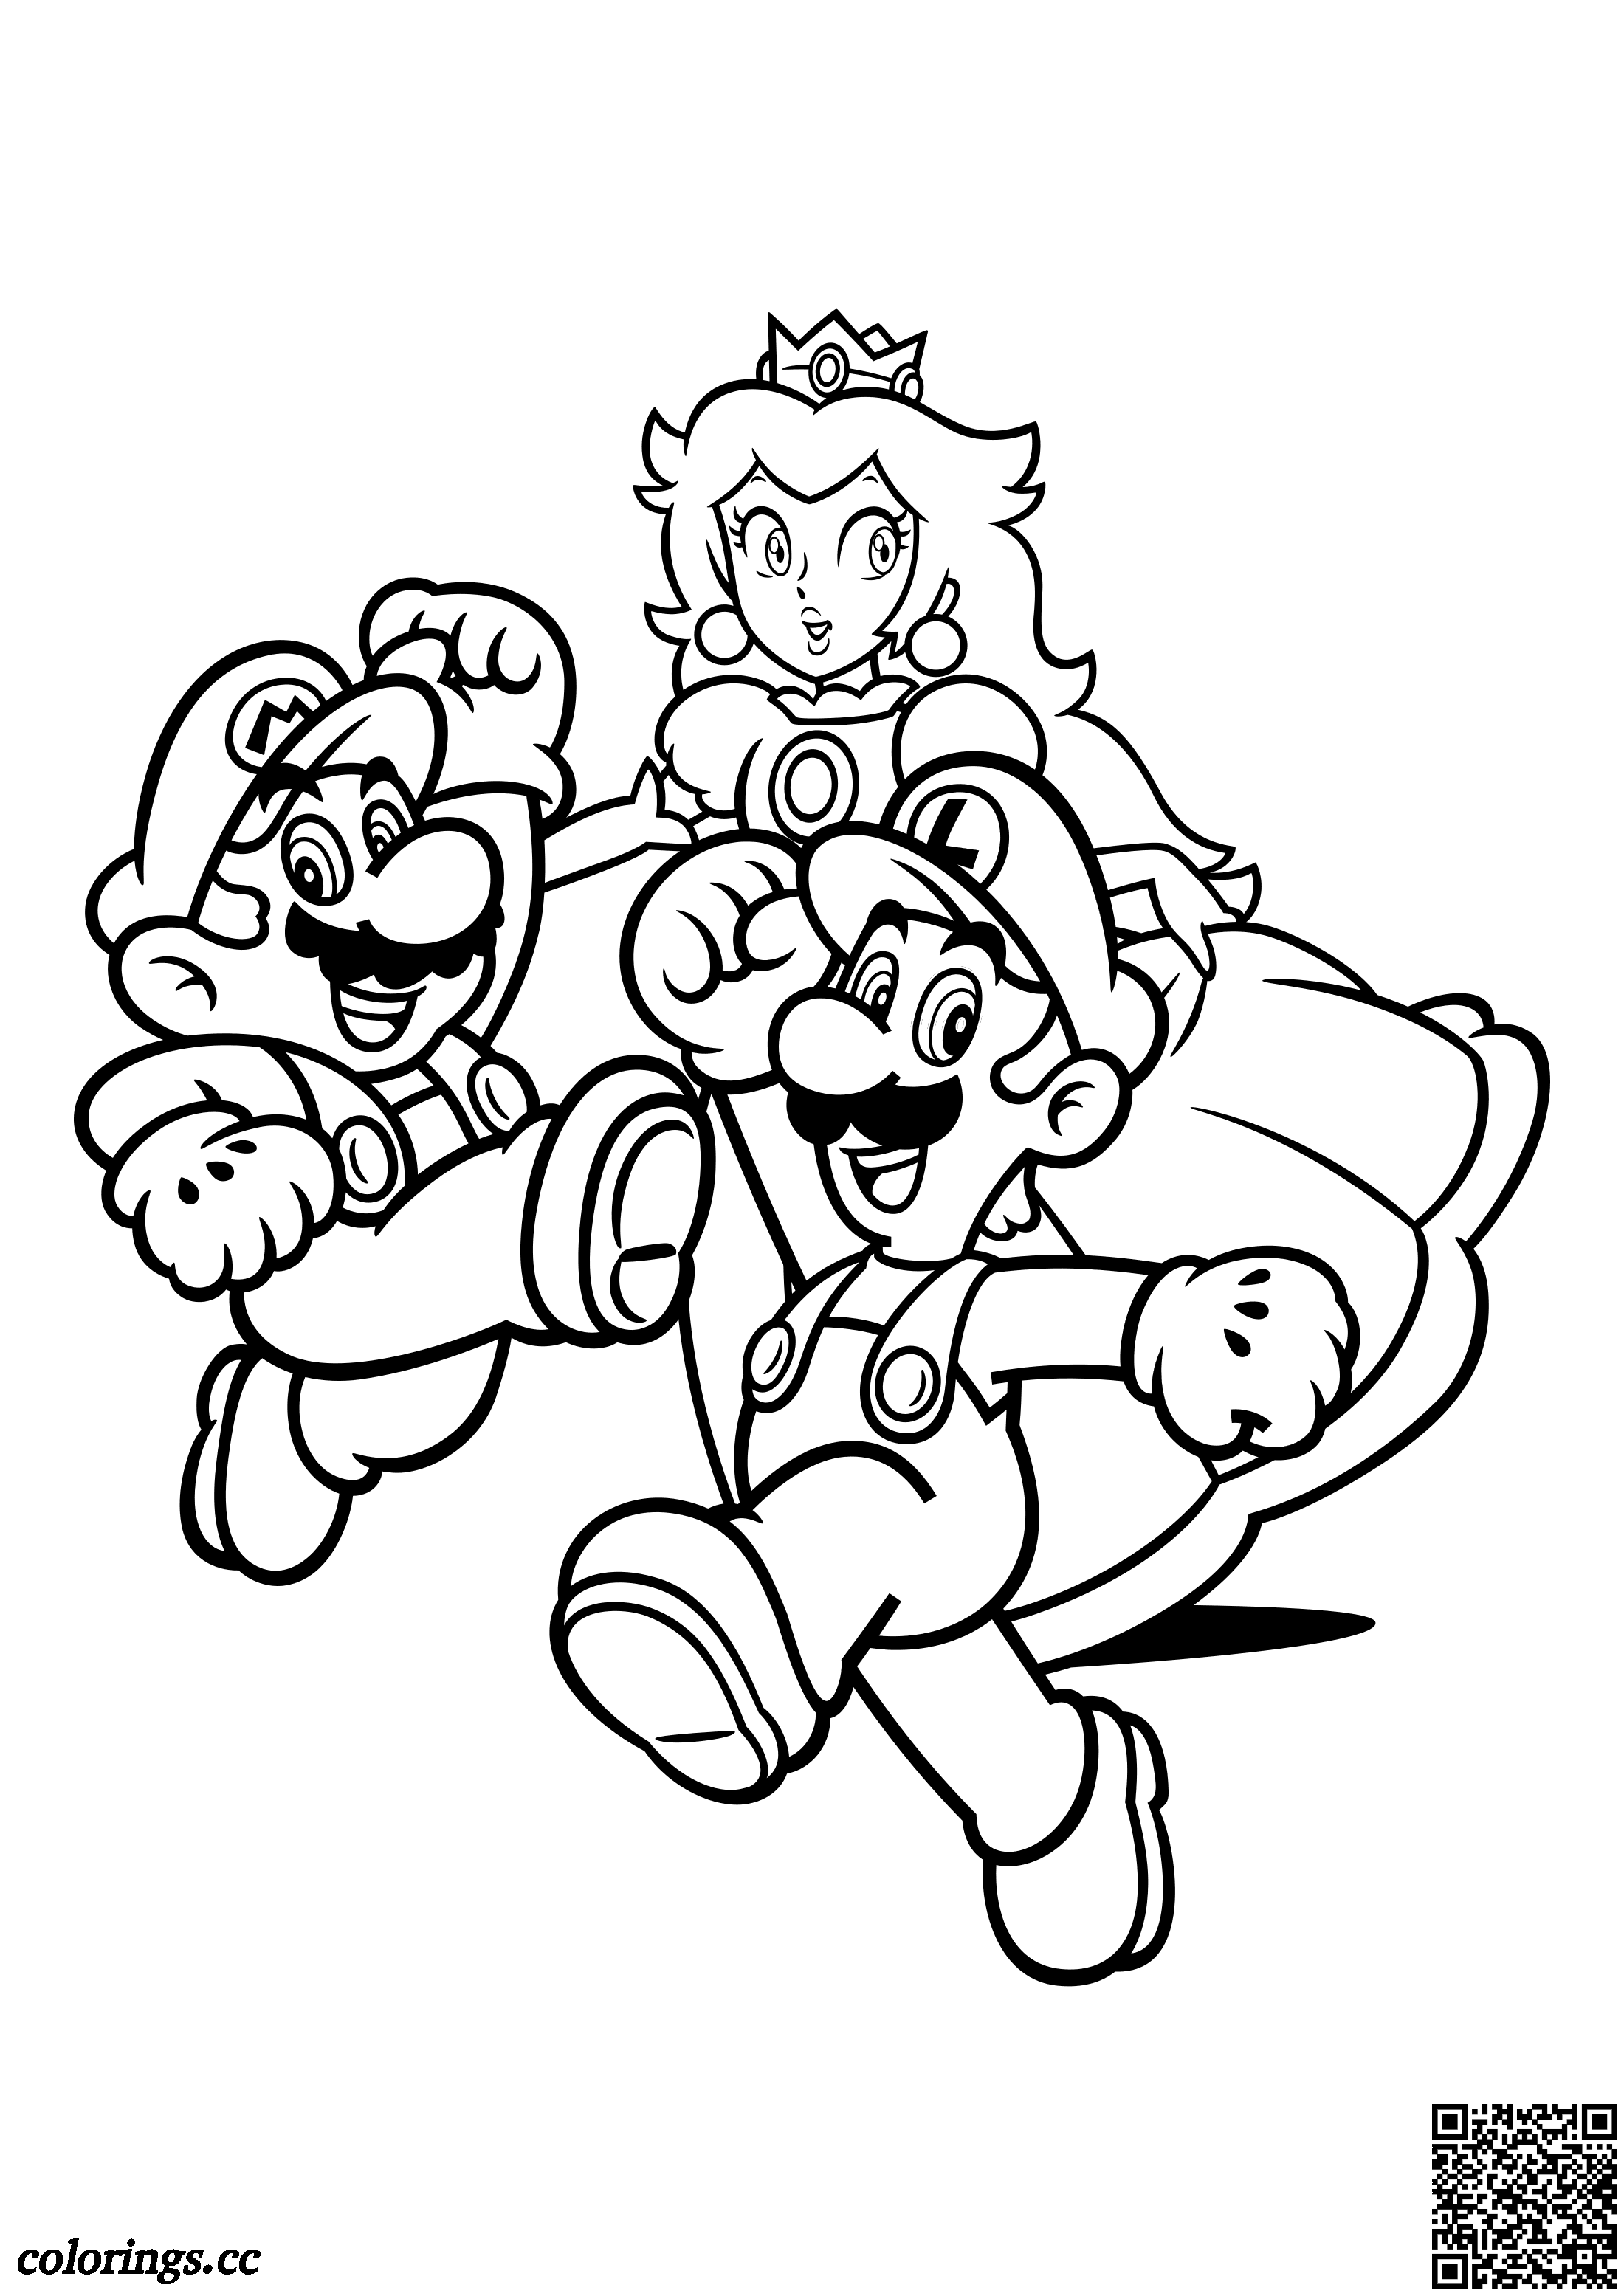 Colouring Pages Princess Peach Free Coloring Pages Printable